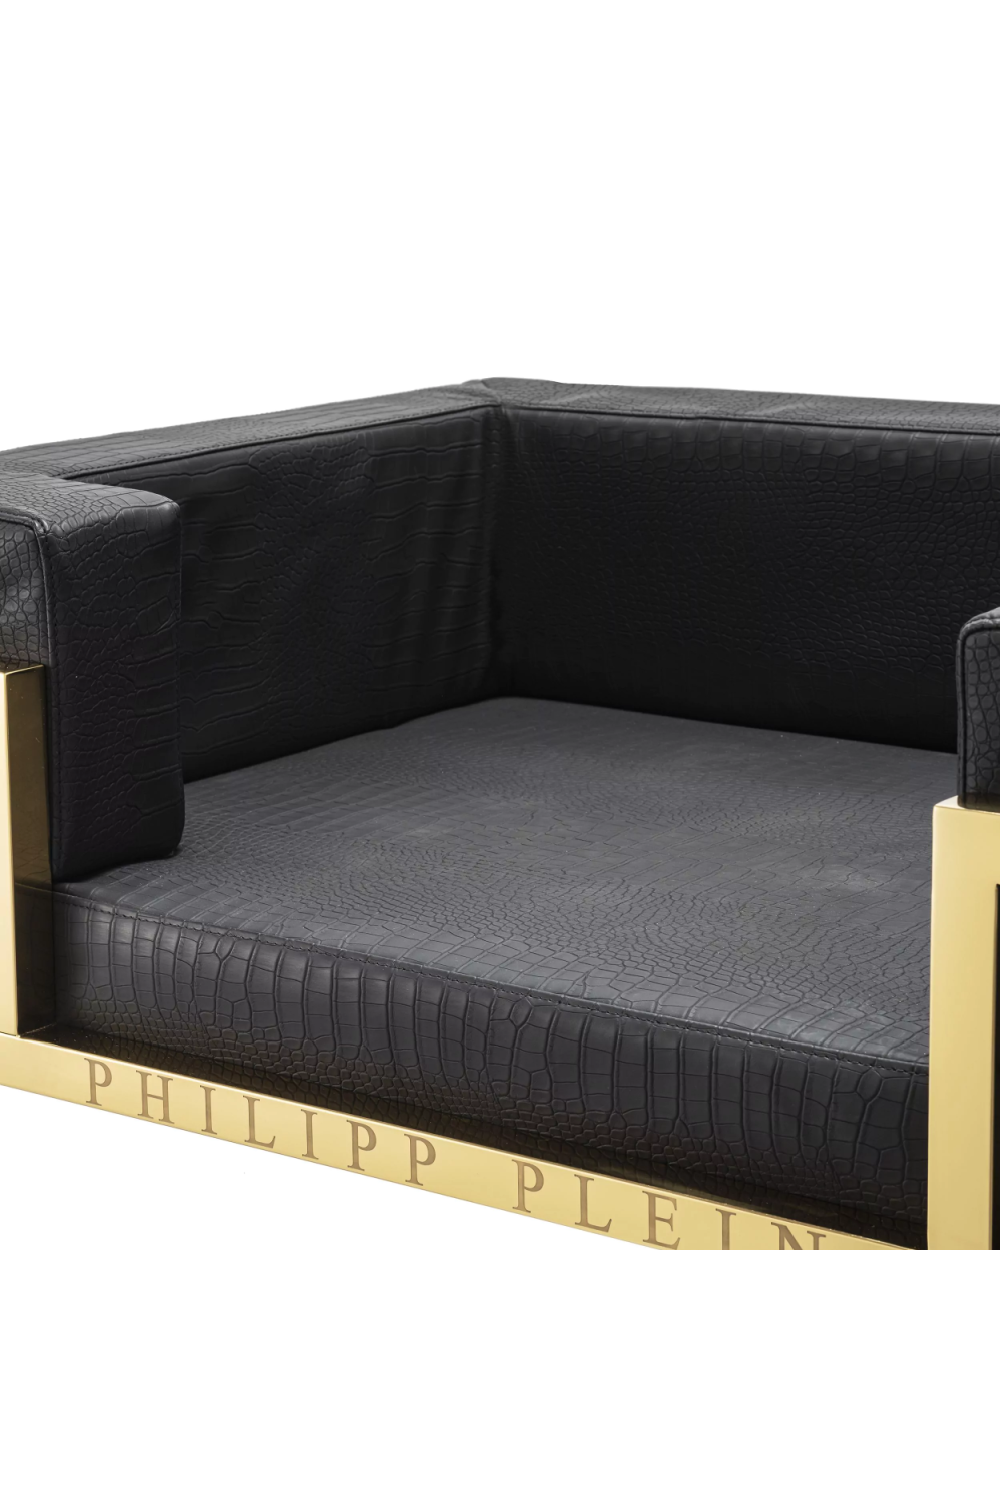 Philipp Plein on Turning a €1,500 Dog Bed Into a Fashion Empire